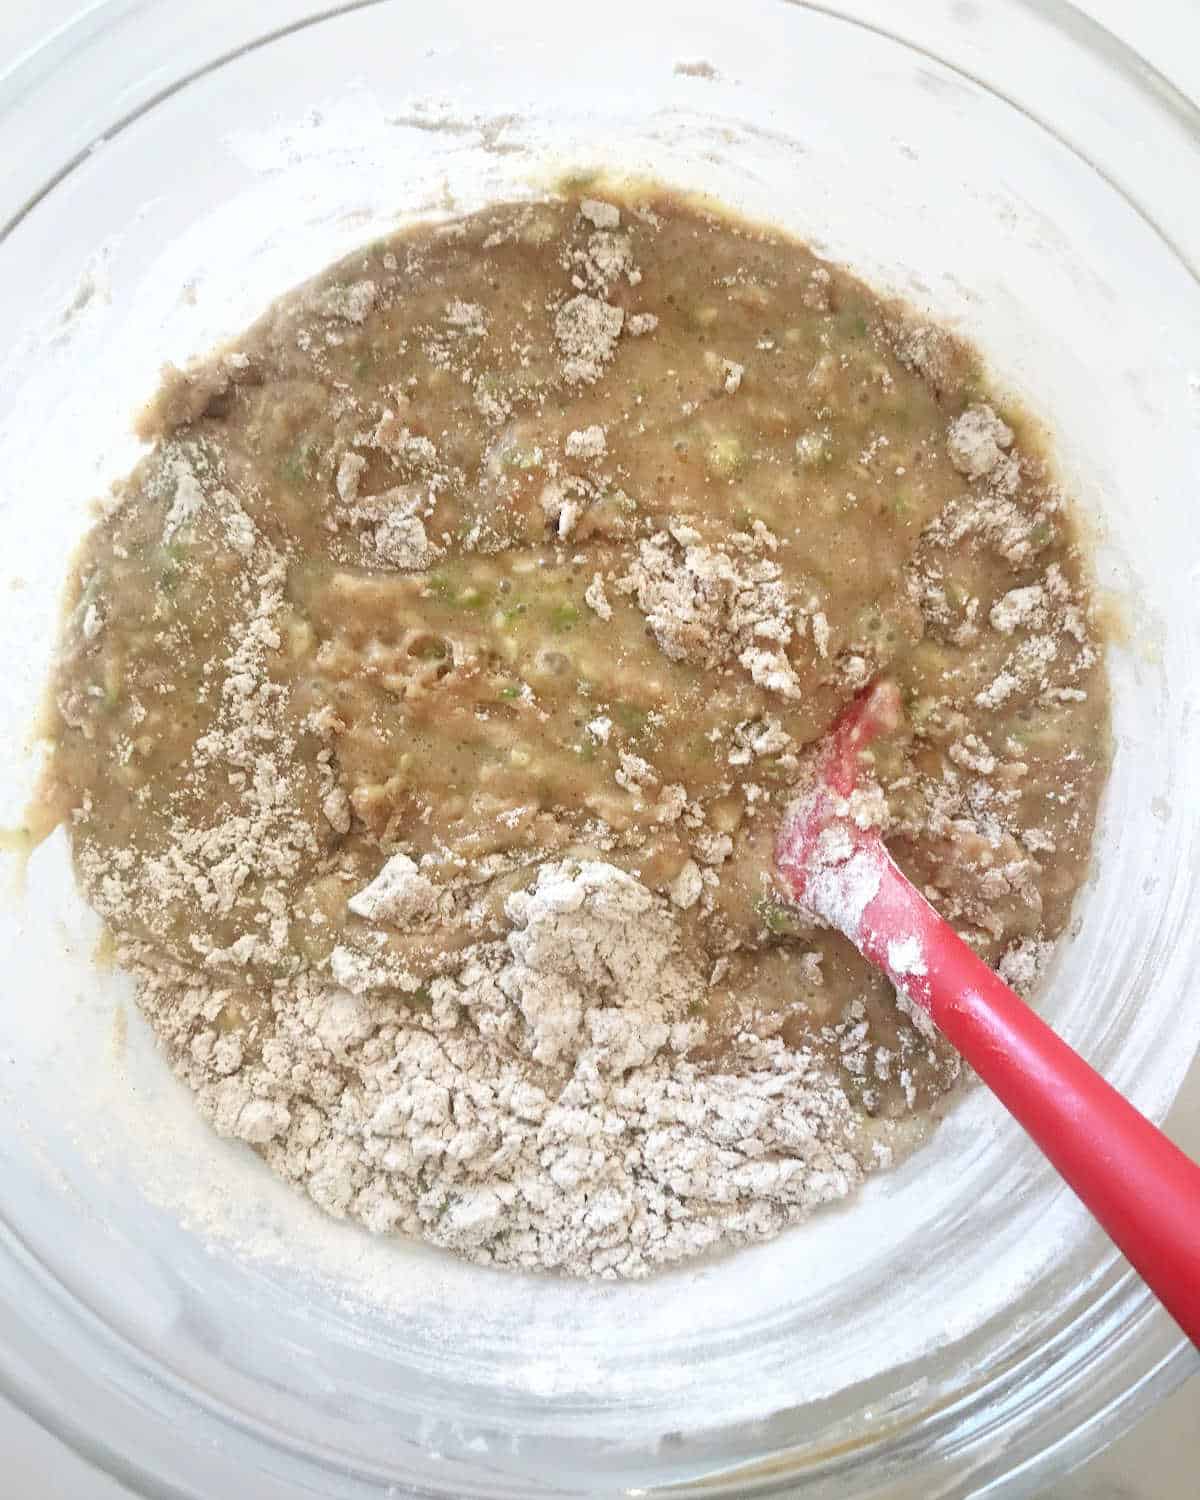 Mixing zucchini bread batter with whole wheat flour in glass bowl with red spatula.